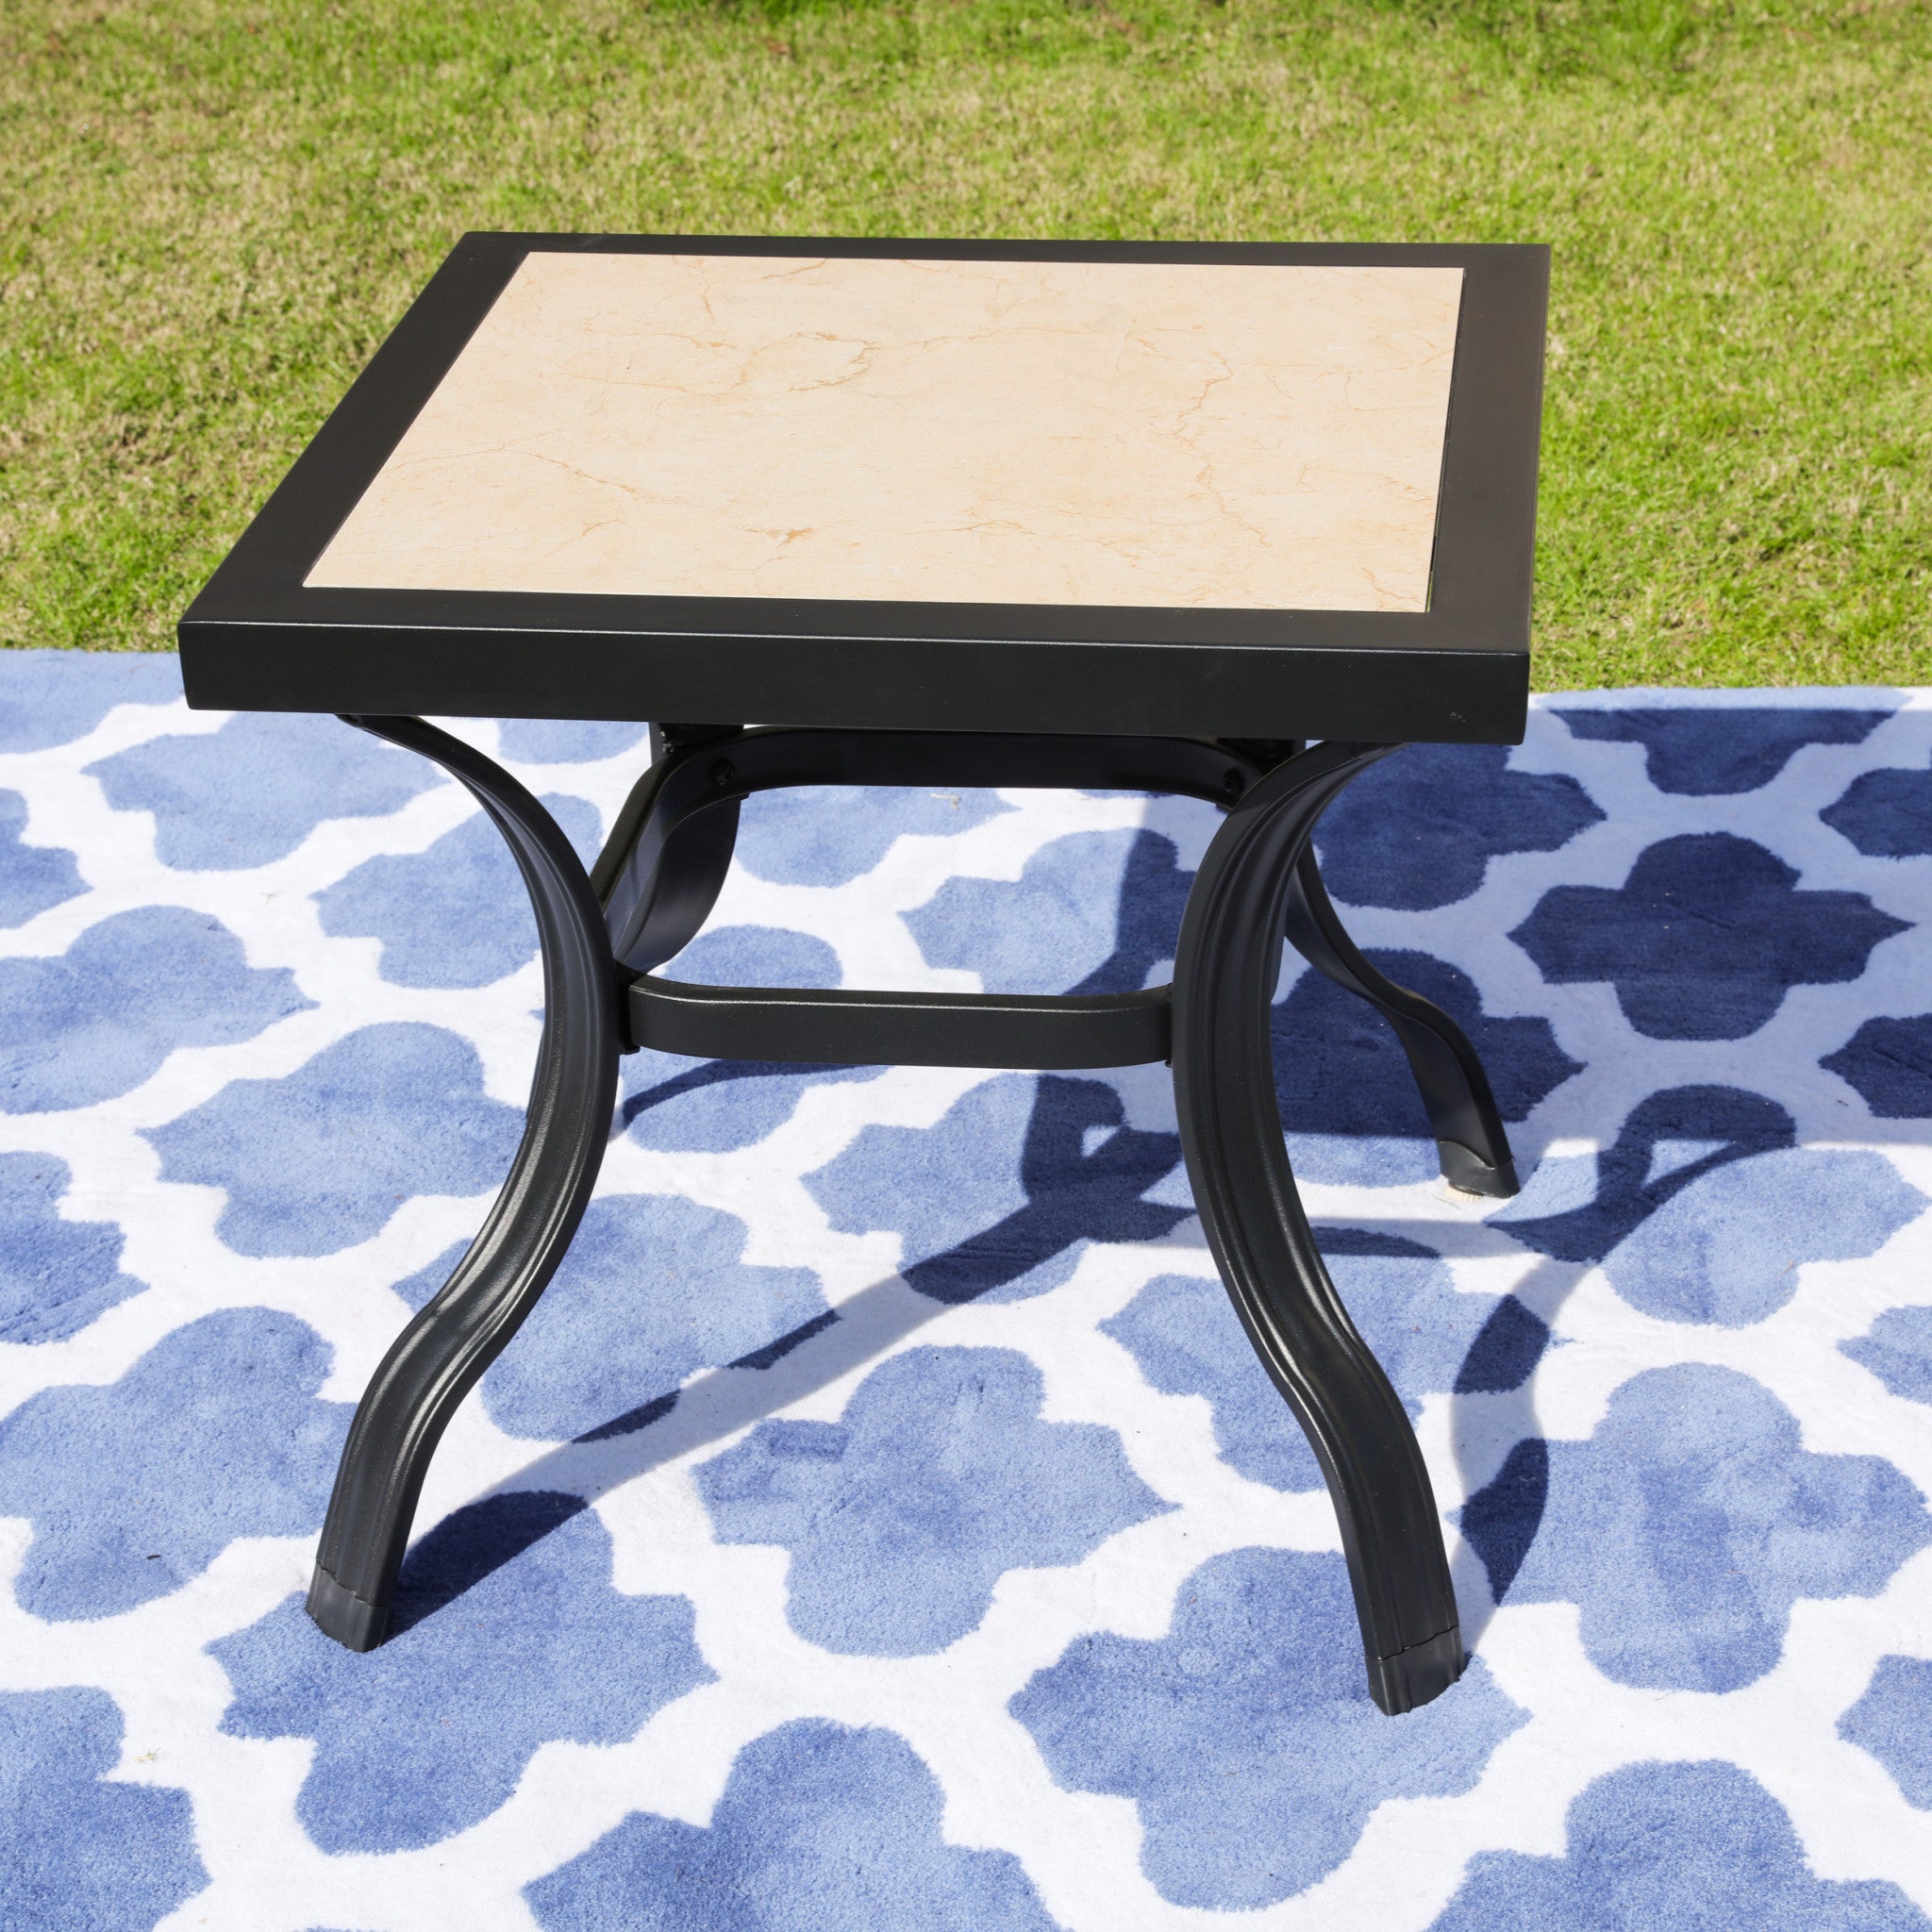 21" Beige and Ivory Square Ceramic Outdoor Side Table